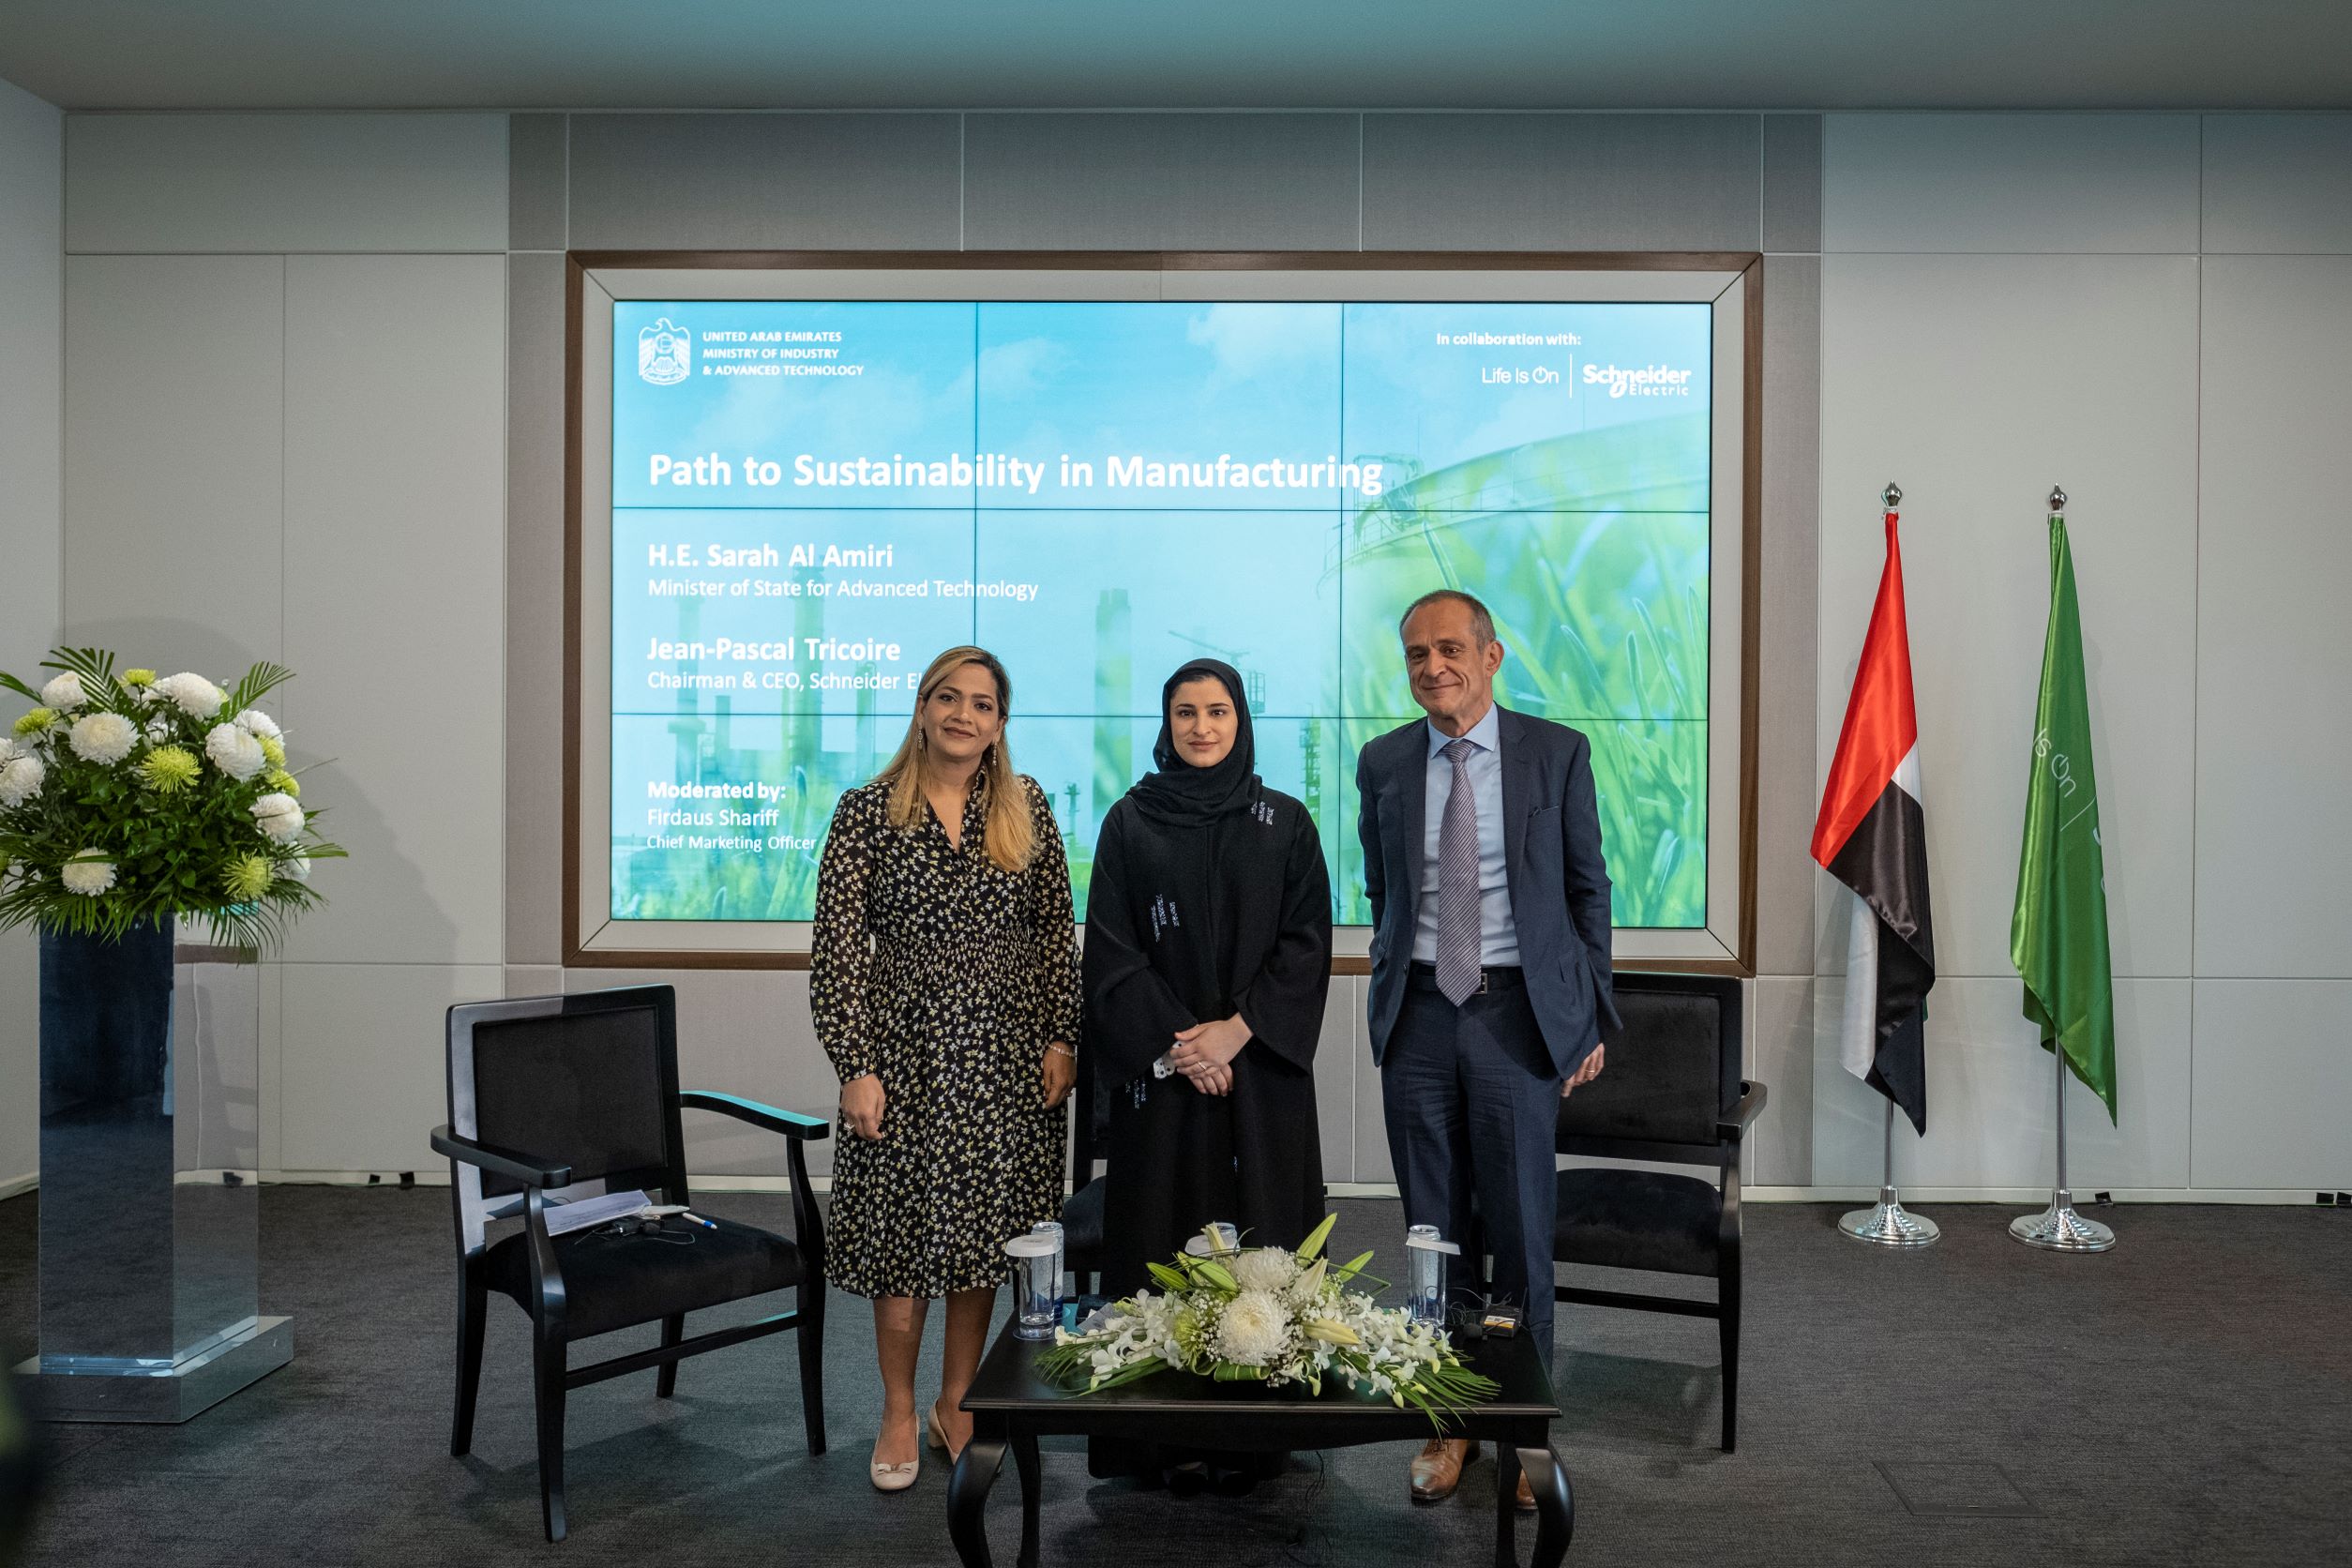 Ministry of Industry and Advanced Technology Explores the Path to Sustainability in the Manufacturing Sector with Schneider Electric